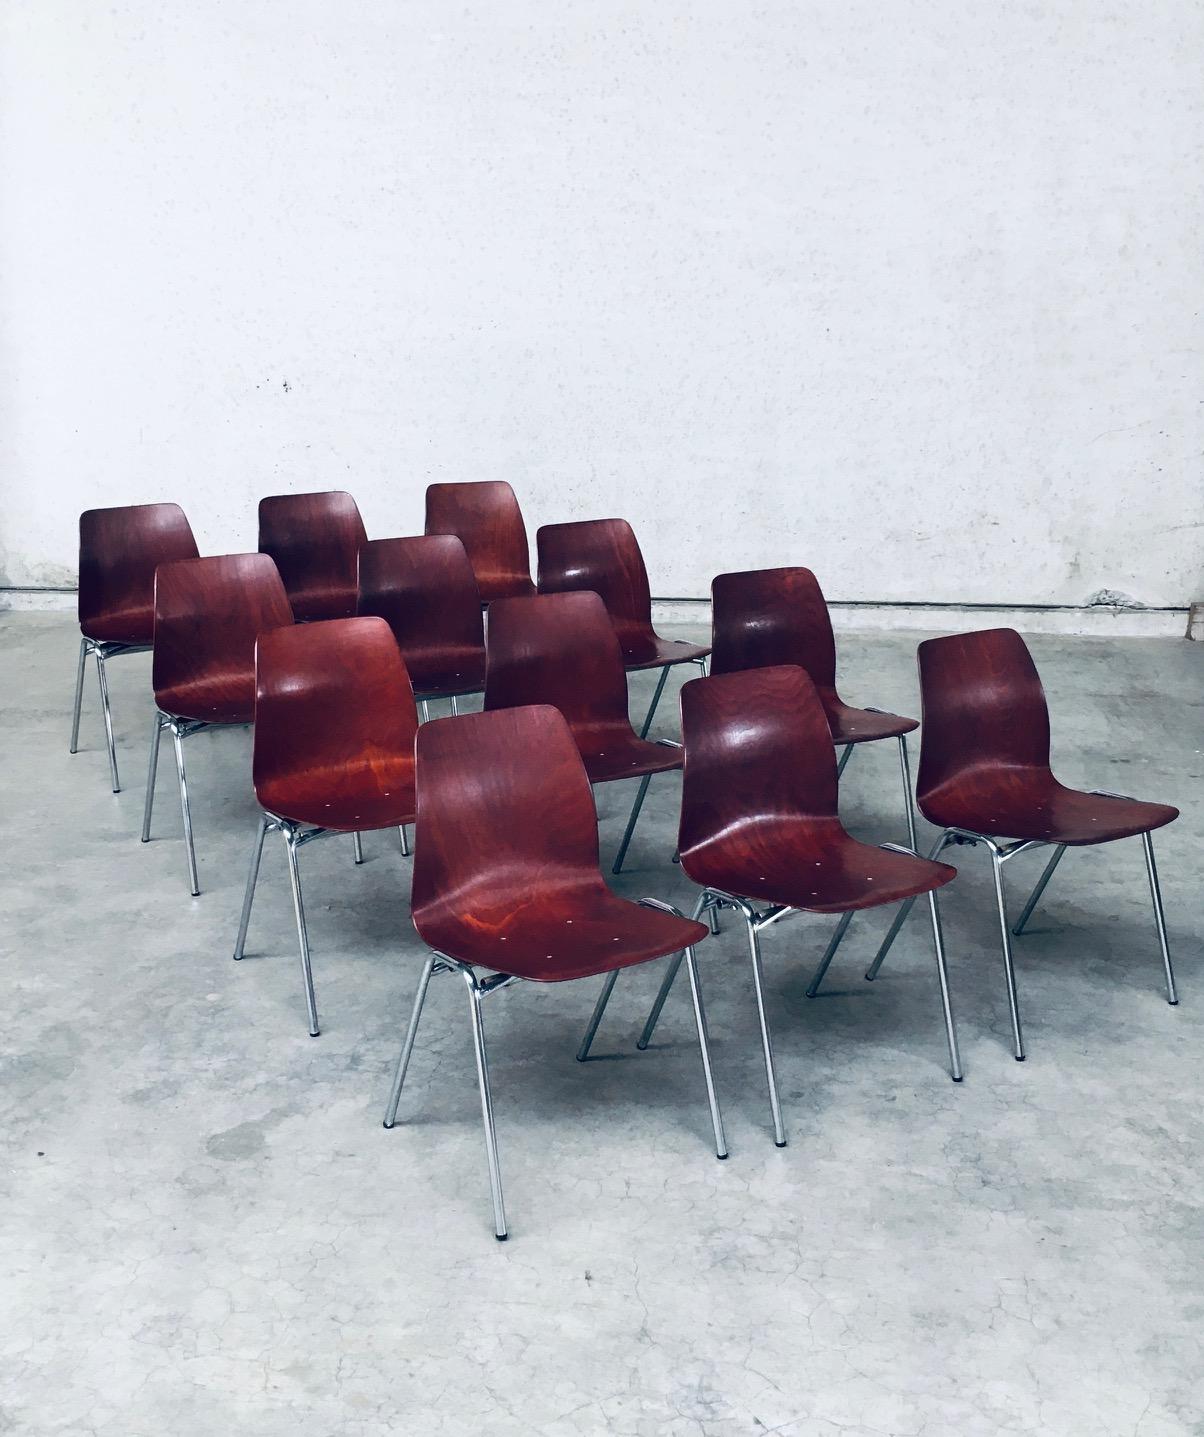 Midcentury Design Stacking Chairs by Elmar Flötotto for Pagholz, 1960's Germany For Sale 14